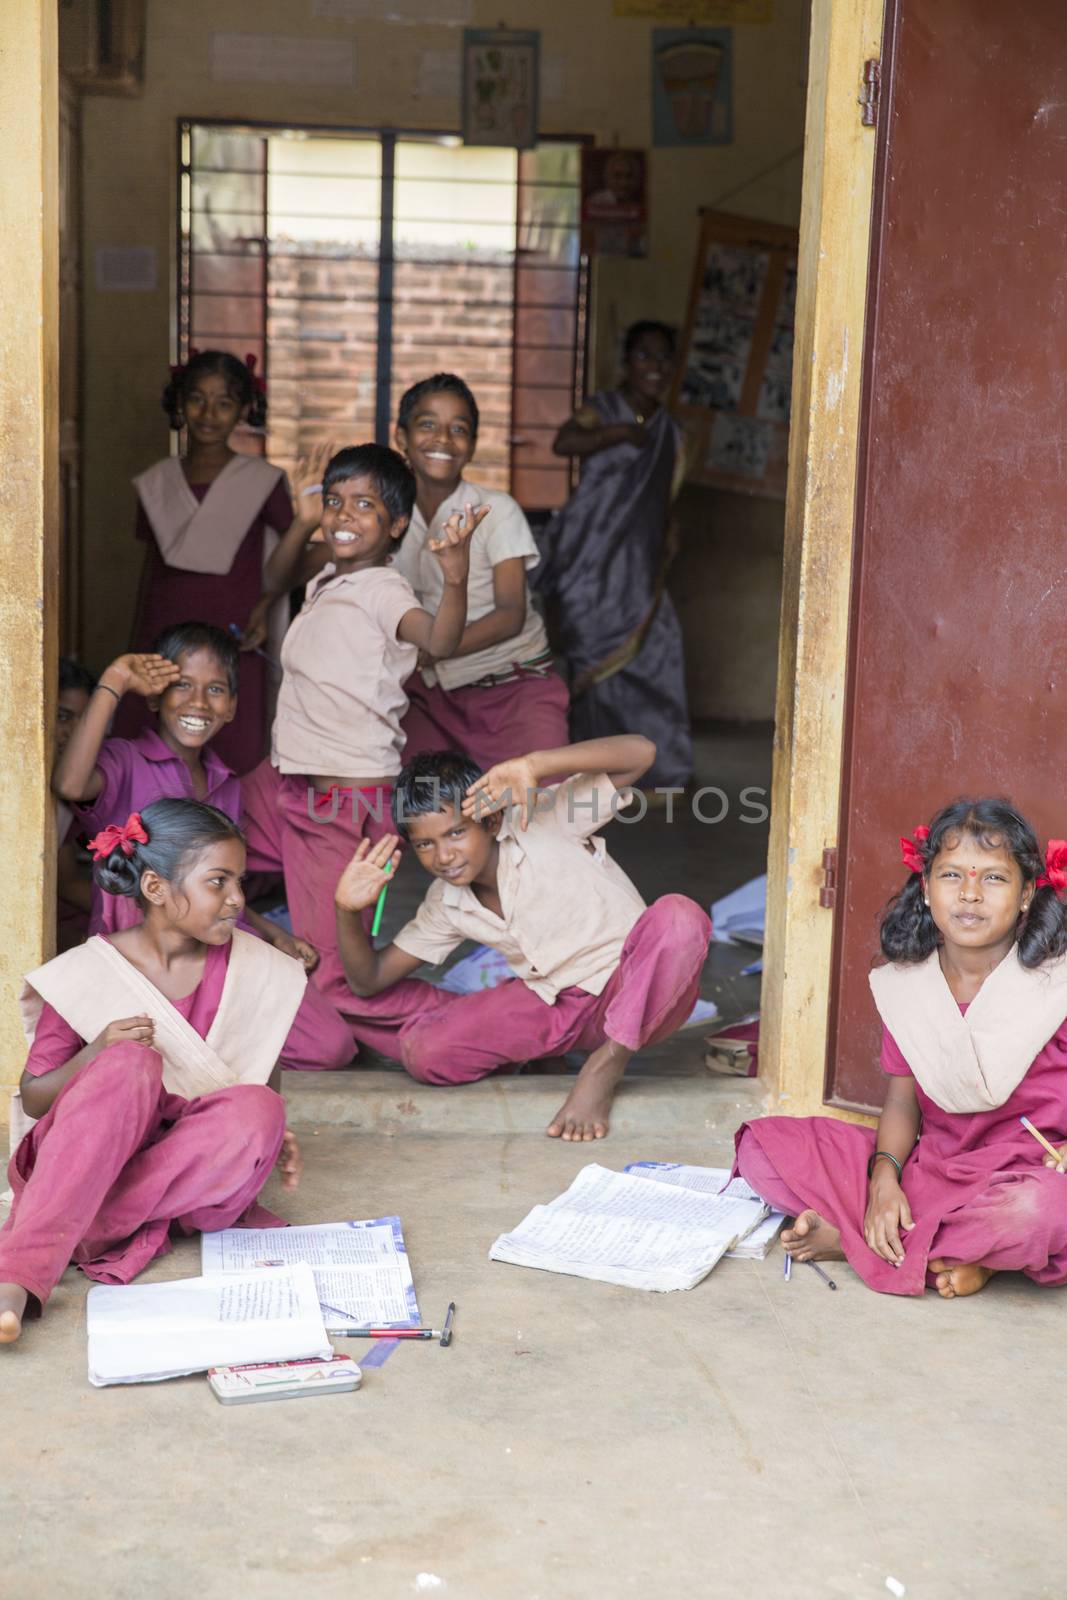 Documentary image. Edotorial. School students by CatherineL-Prod